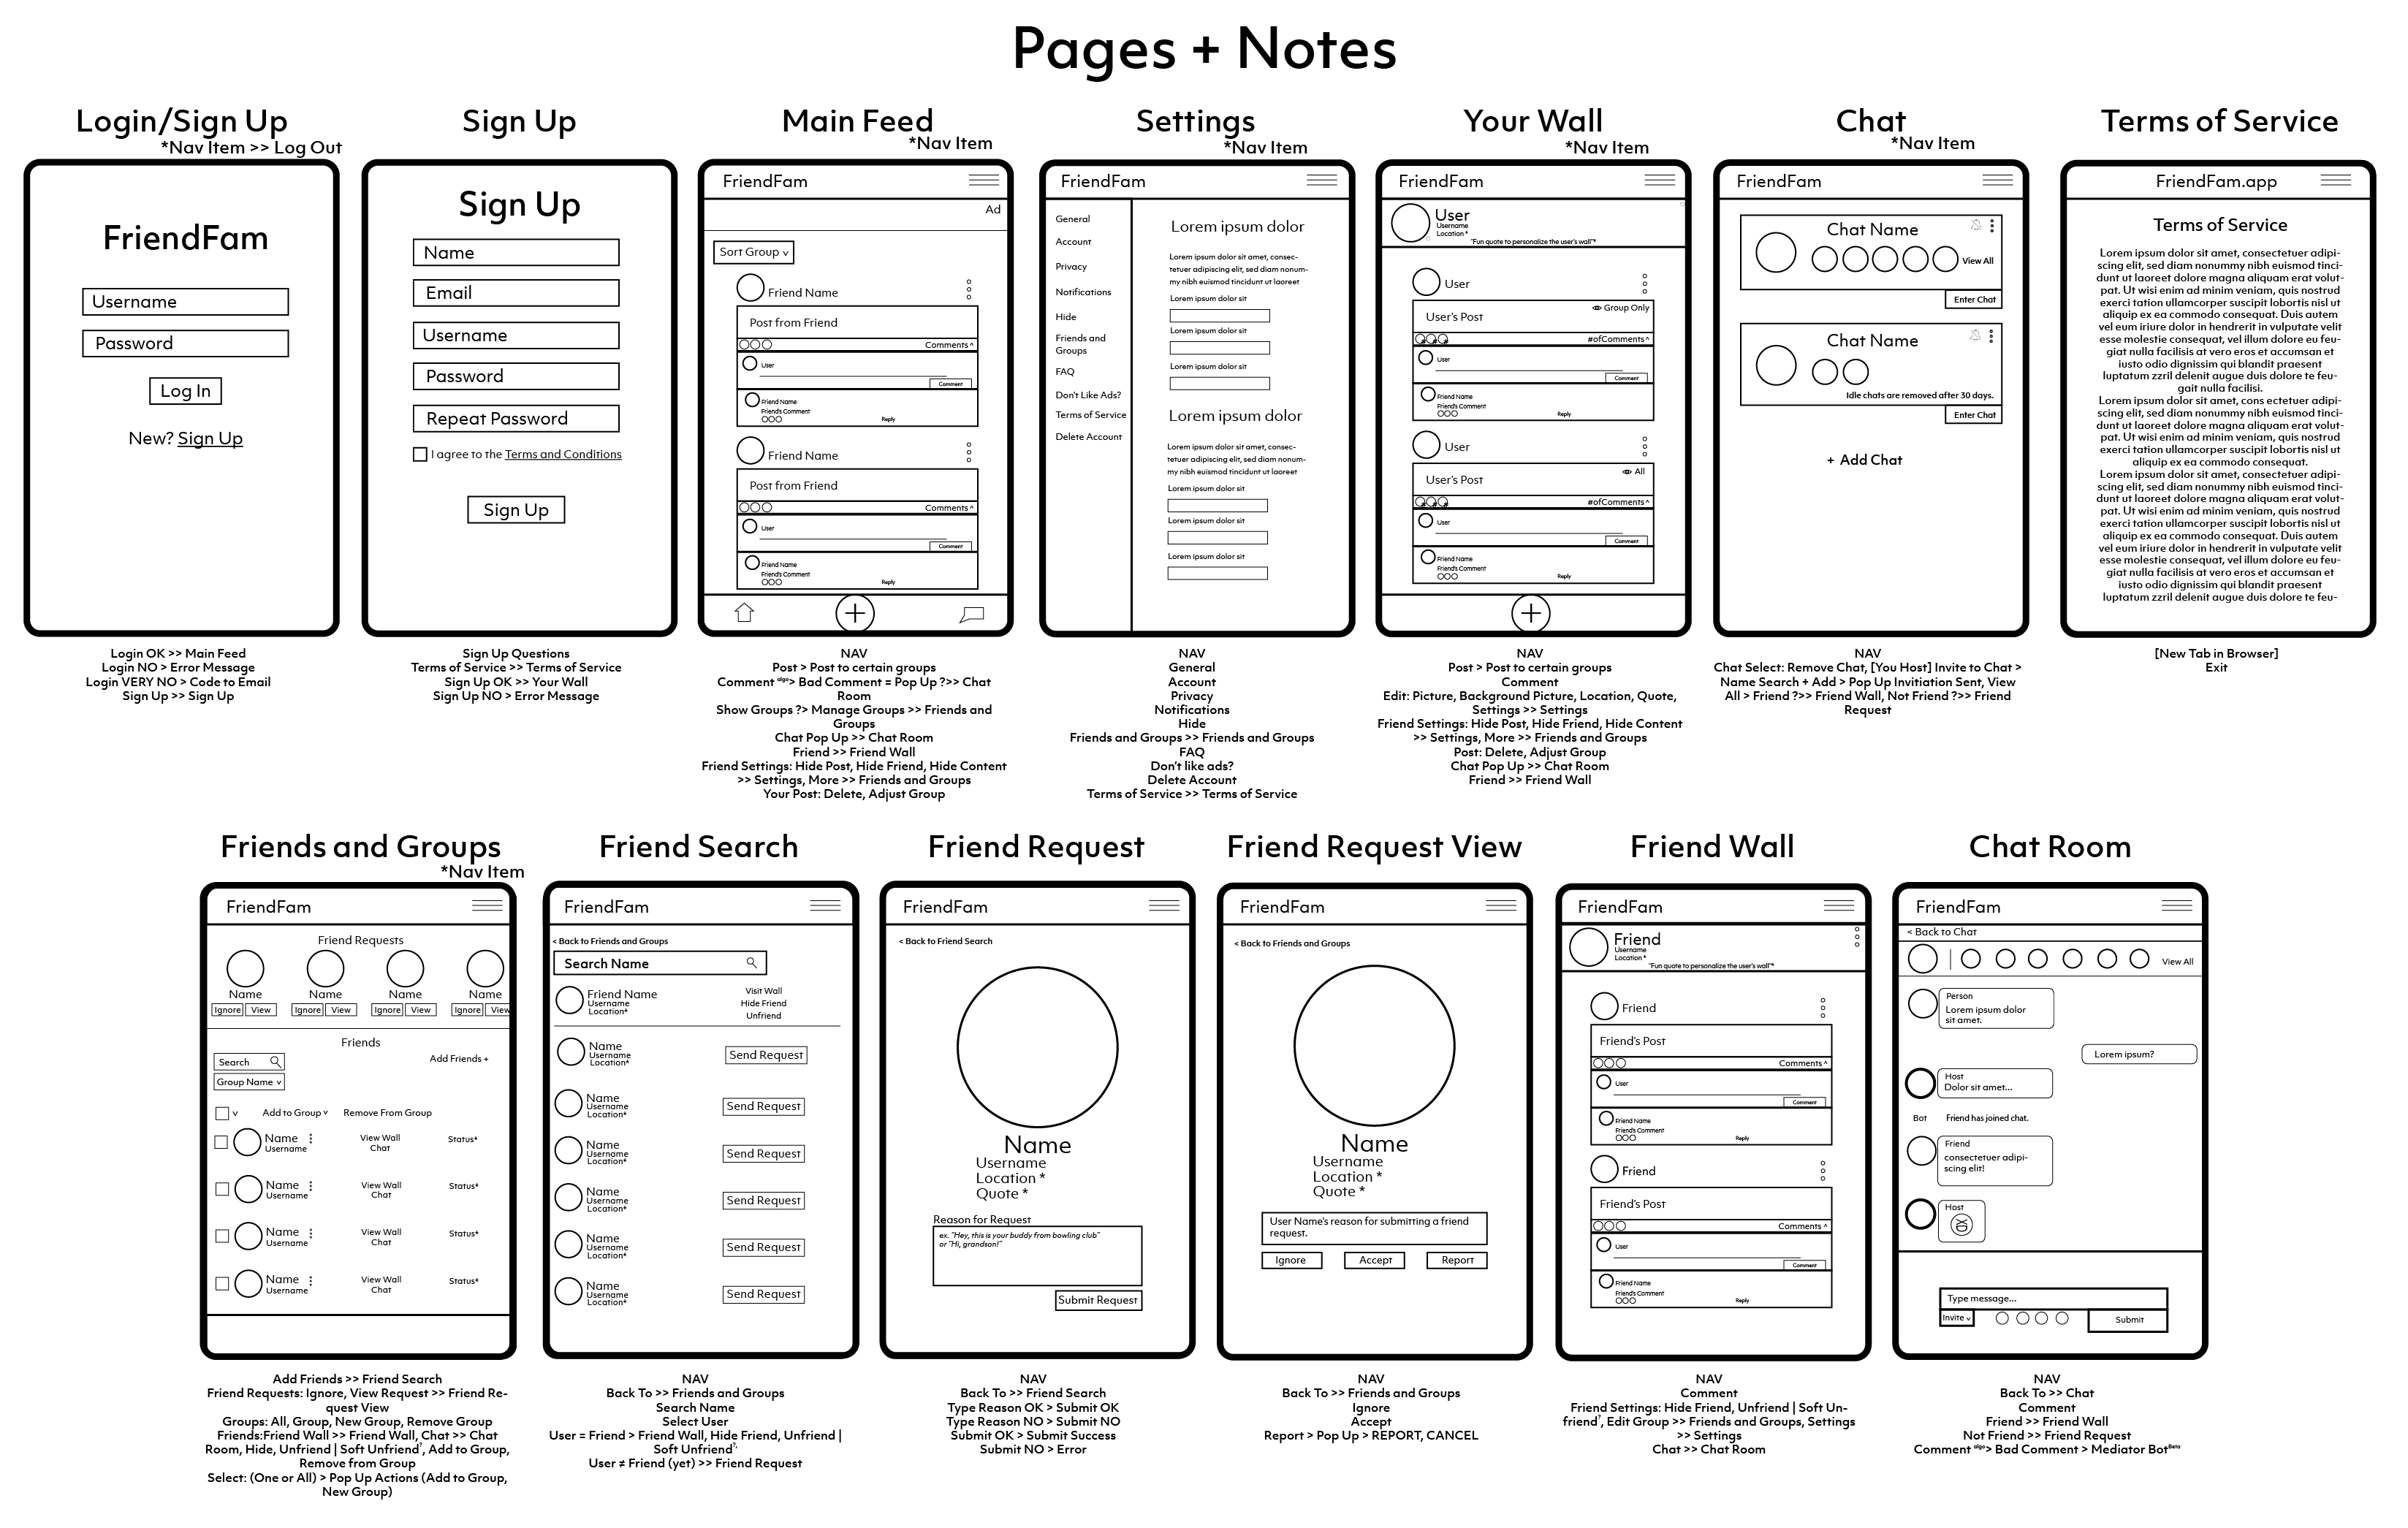 Wireframe drafts of thumbnails